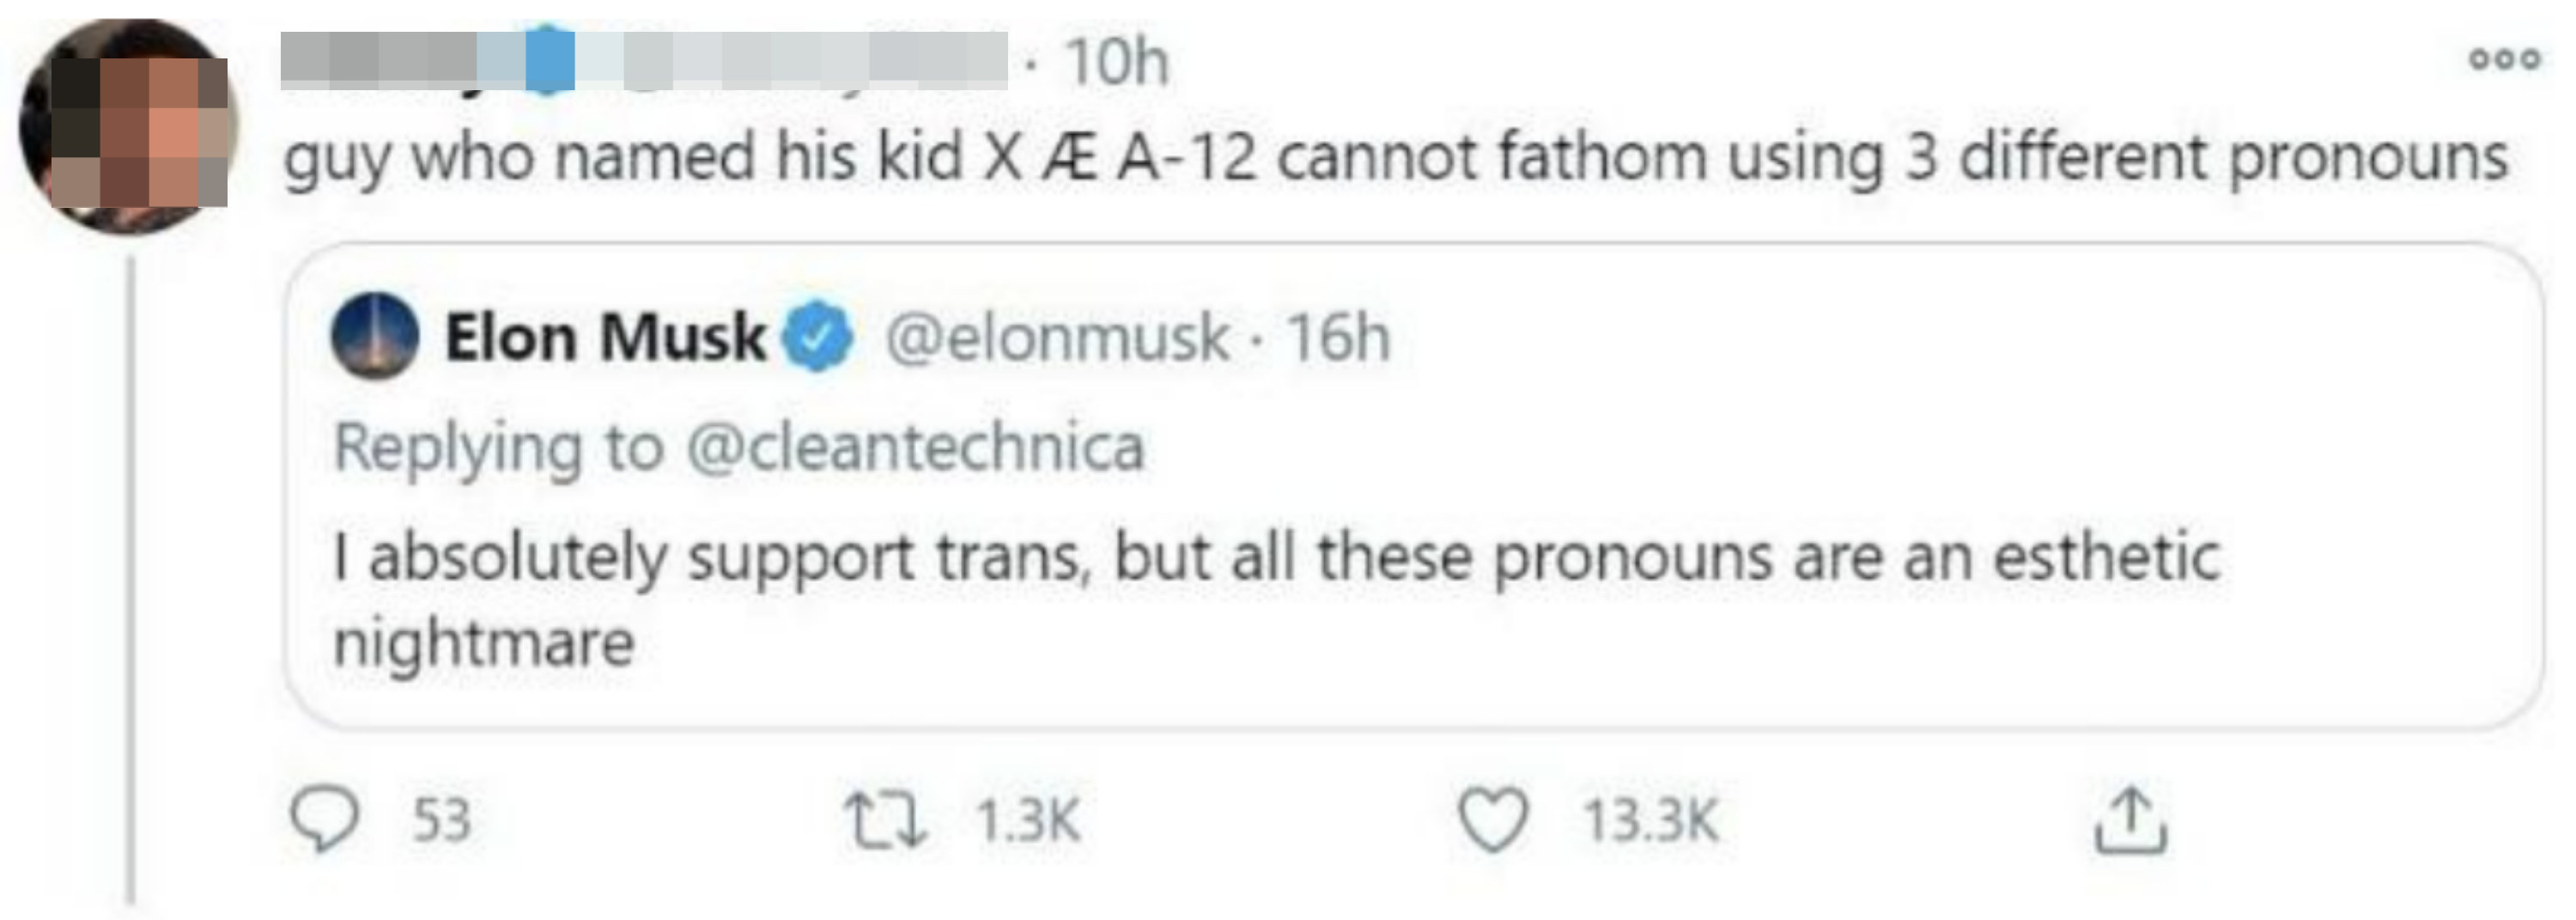 &quot;guy who named his kid XAE A-12 cannot fathom using 3 different pronouns&quot;